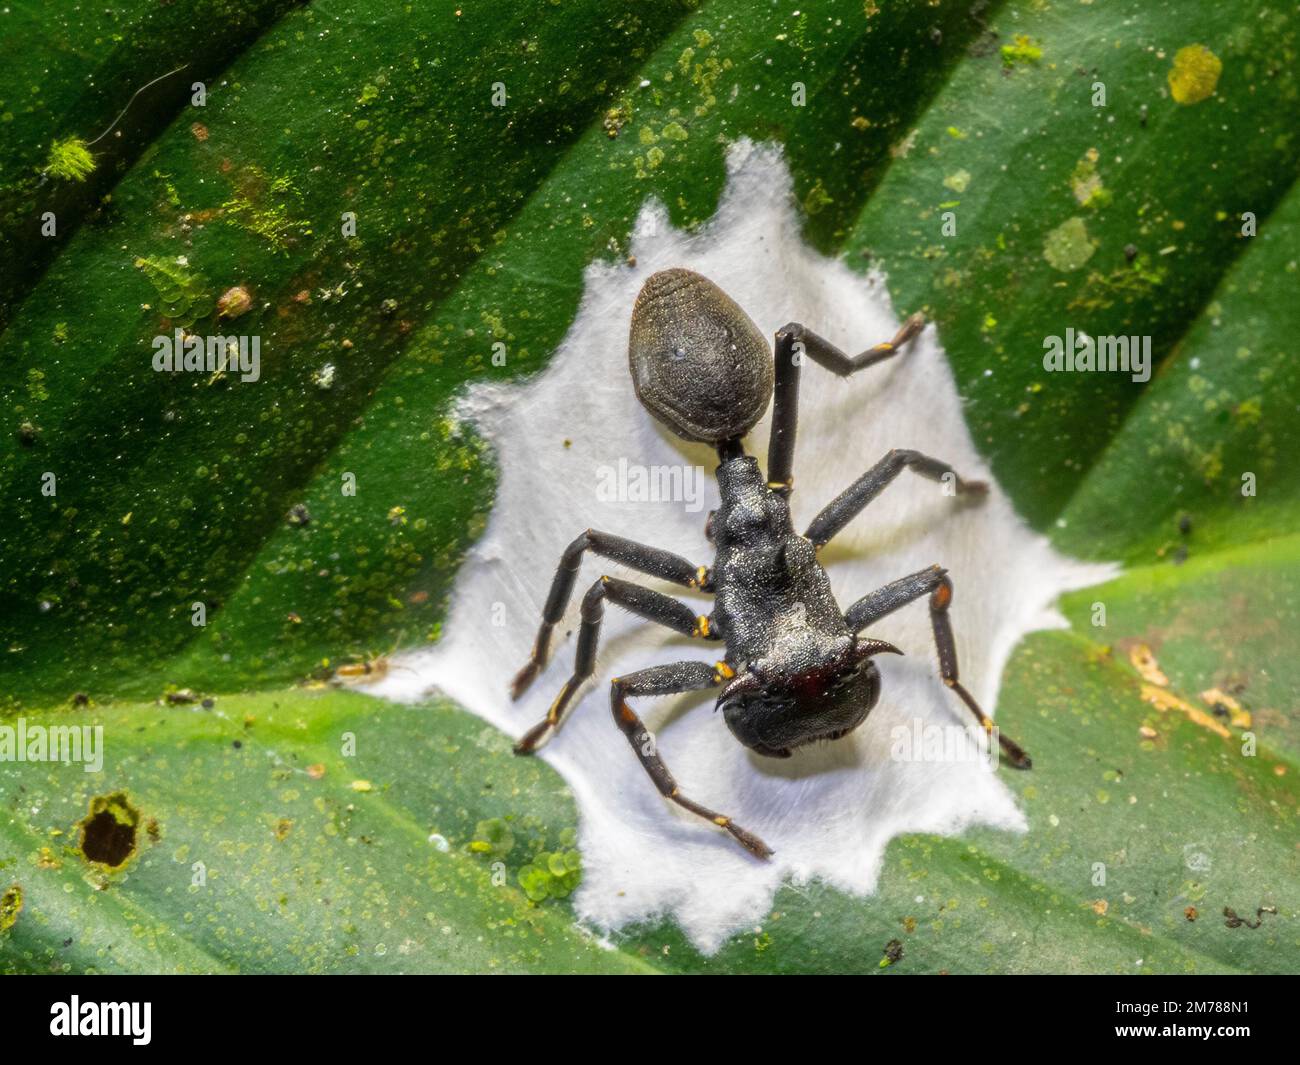 Ant mimic spider (Apantochilus sp.) guarding its eggs in t,he rainforest, Orellana province, Ecuador. Mimic of a turtle ant, Cephalotes sp. Stock Photo